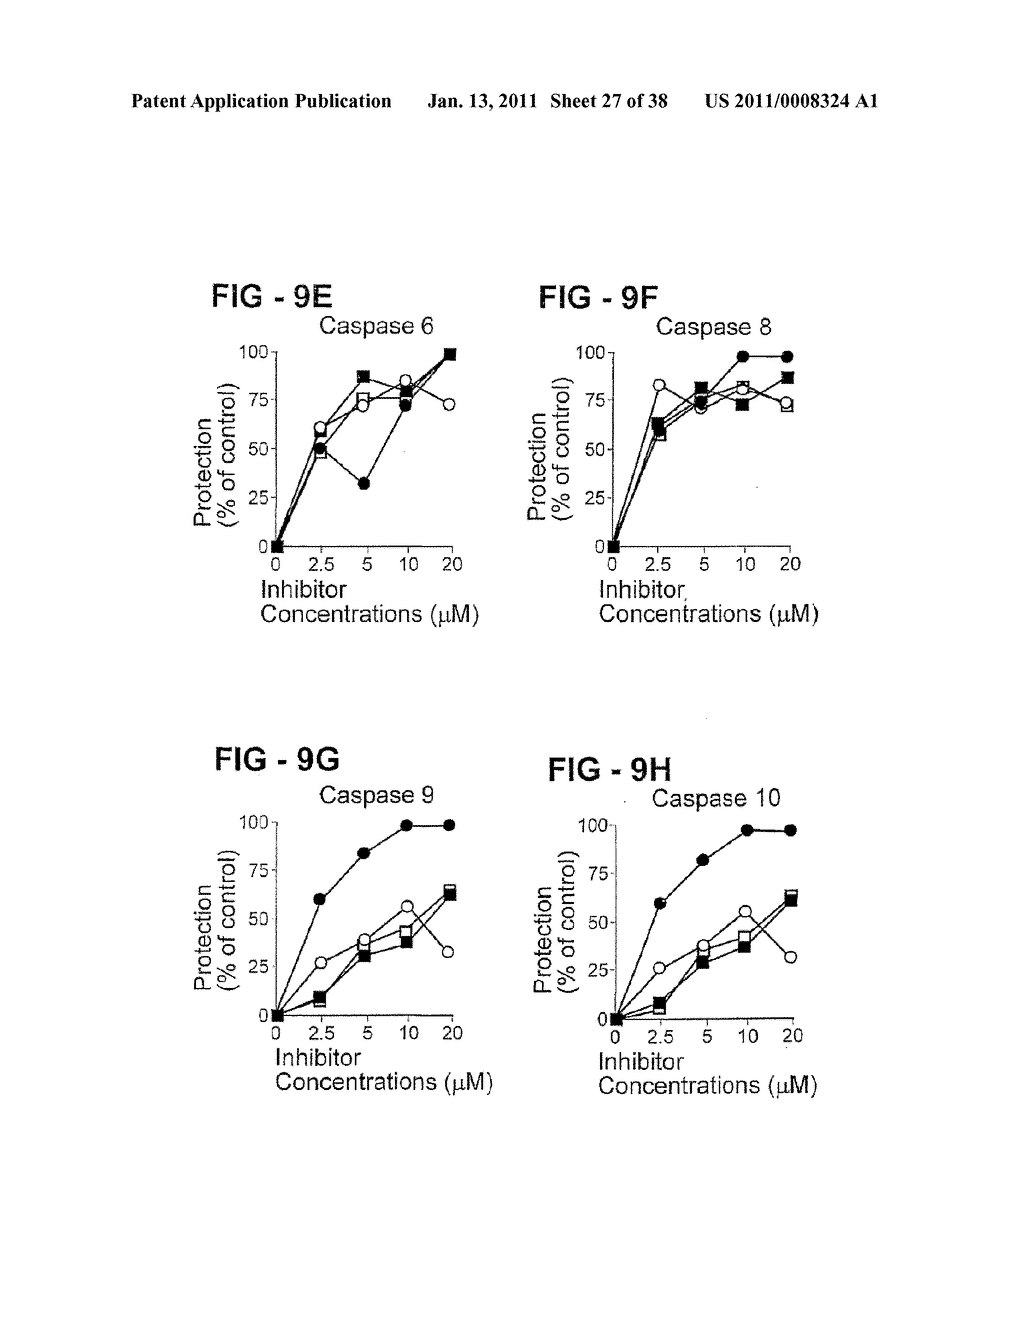 Antibody Selective for a Tumor Necrosis Factor-Related Apoptosis-Inducing Ligand Receptor and Uses Thereof - diagram, schematic, and image 28